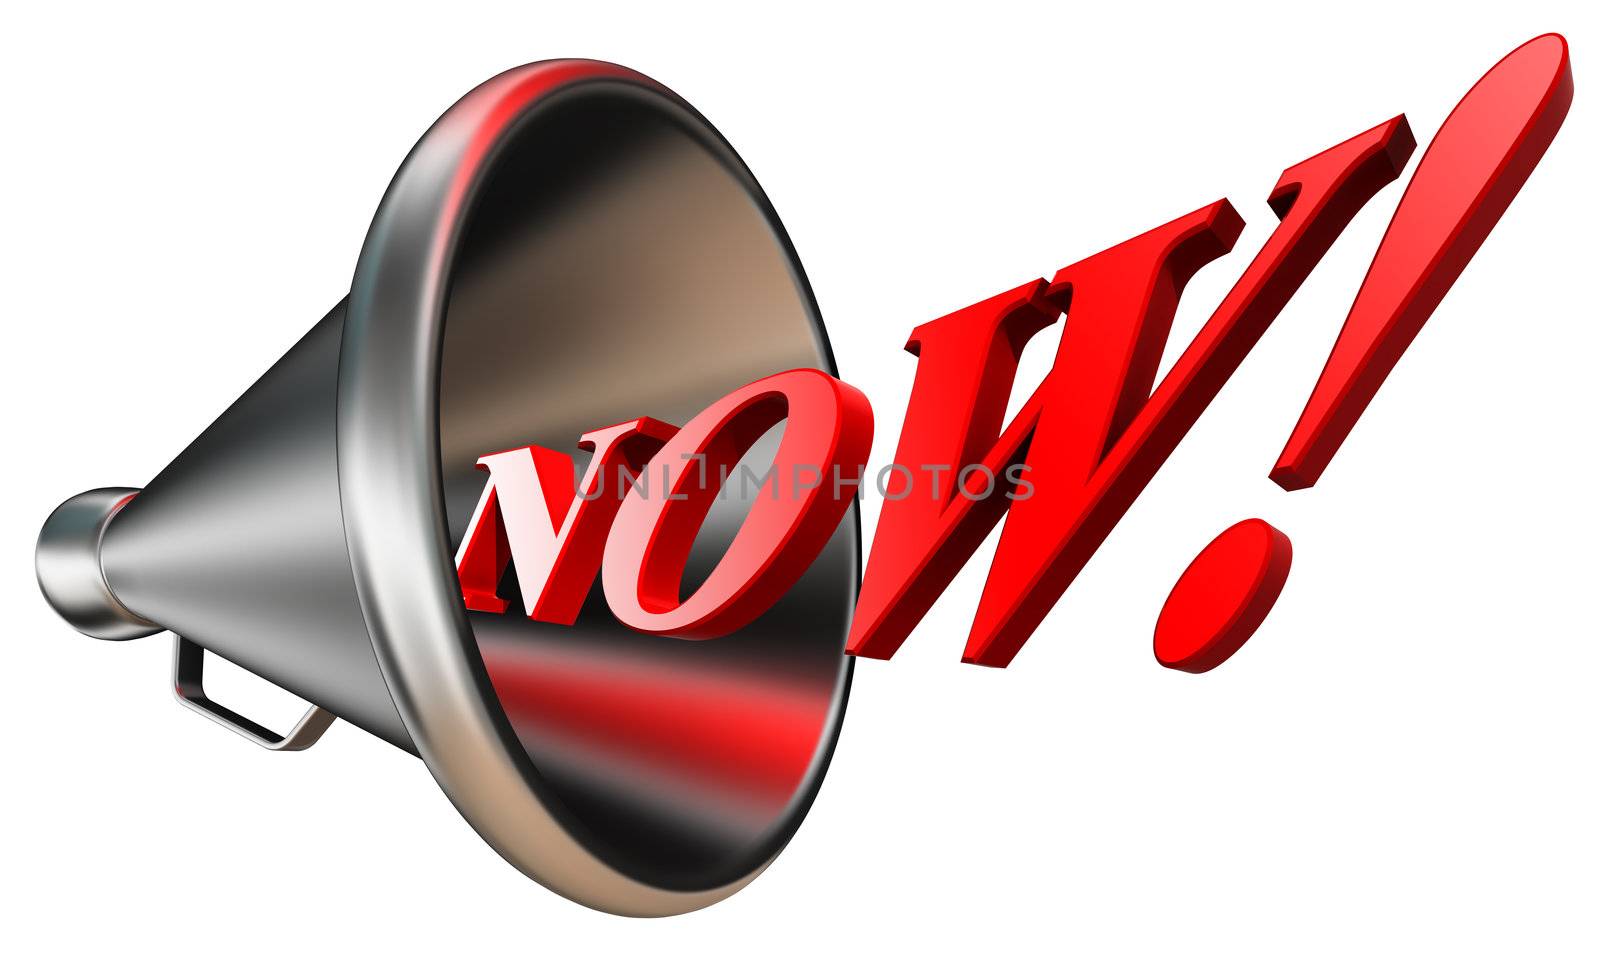 now red word in megaphone isolated on white background. clipping path included